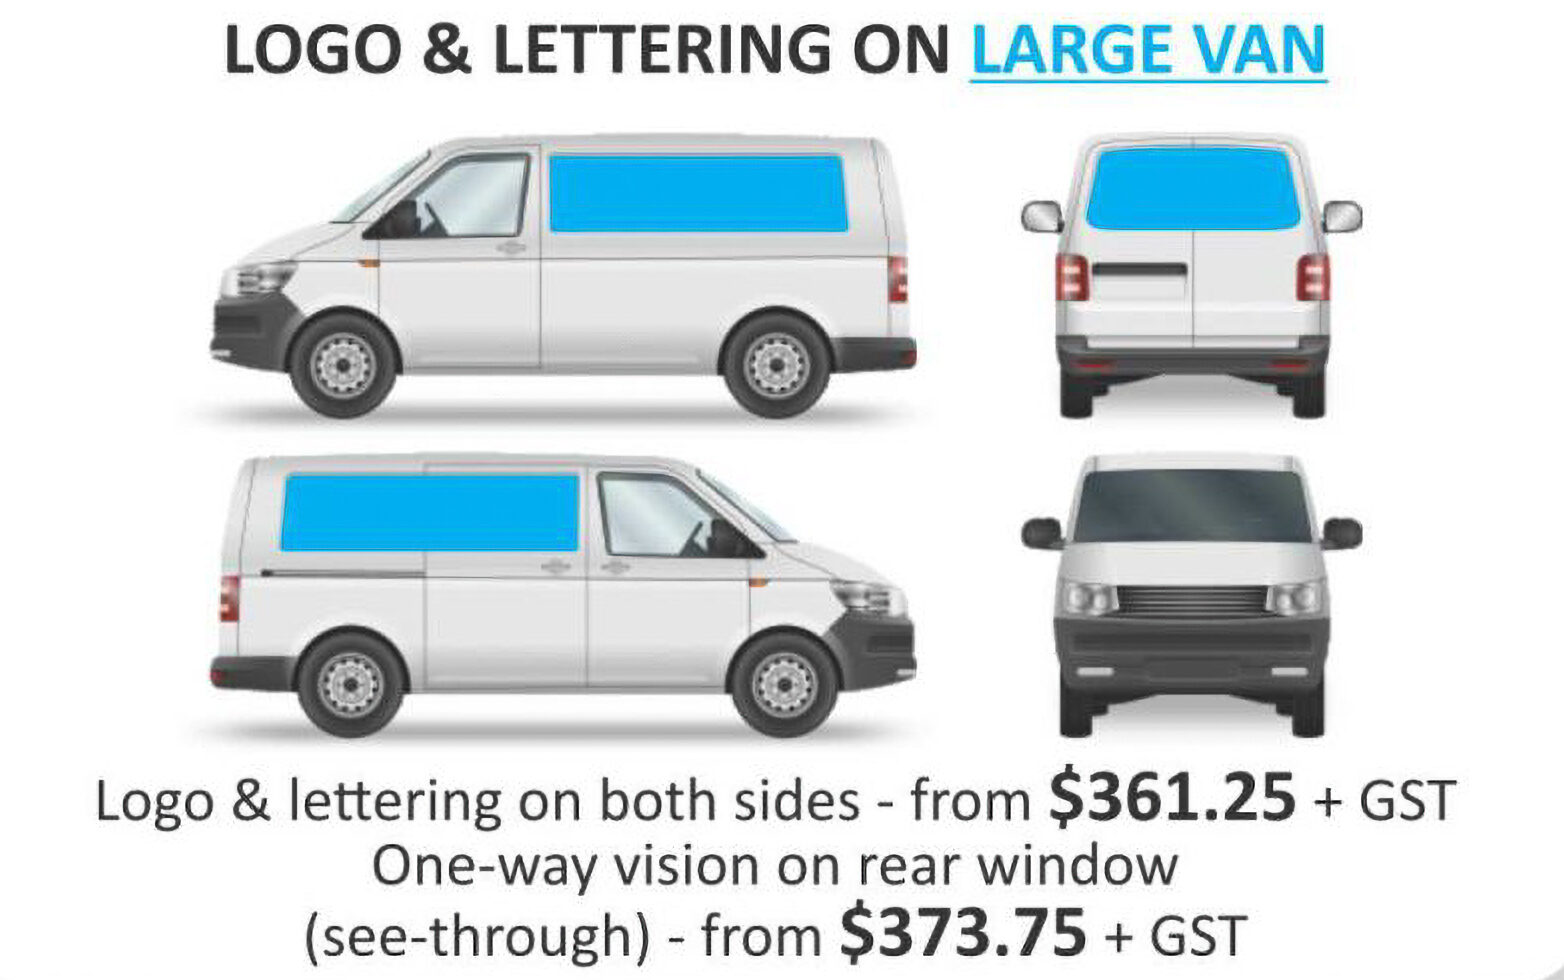 Logo and lettering vehicle signage pricing for a large van in Newcastle